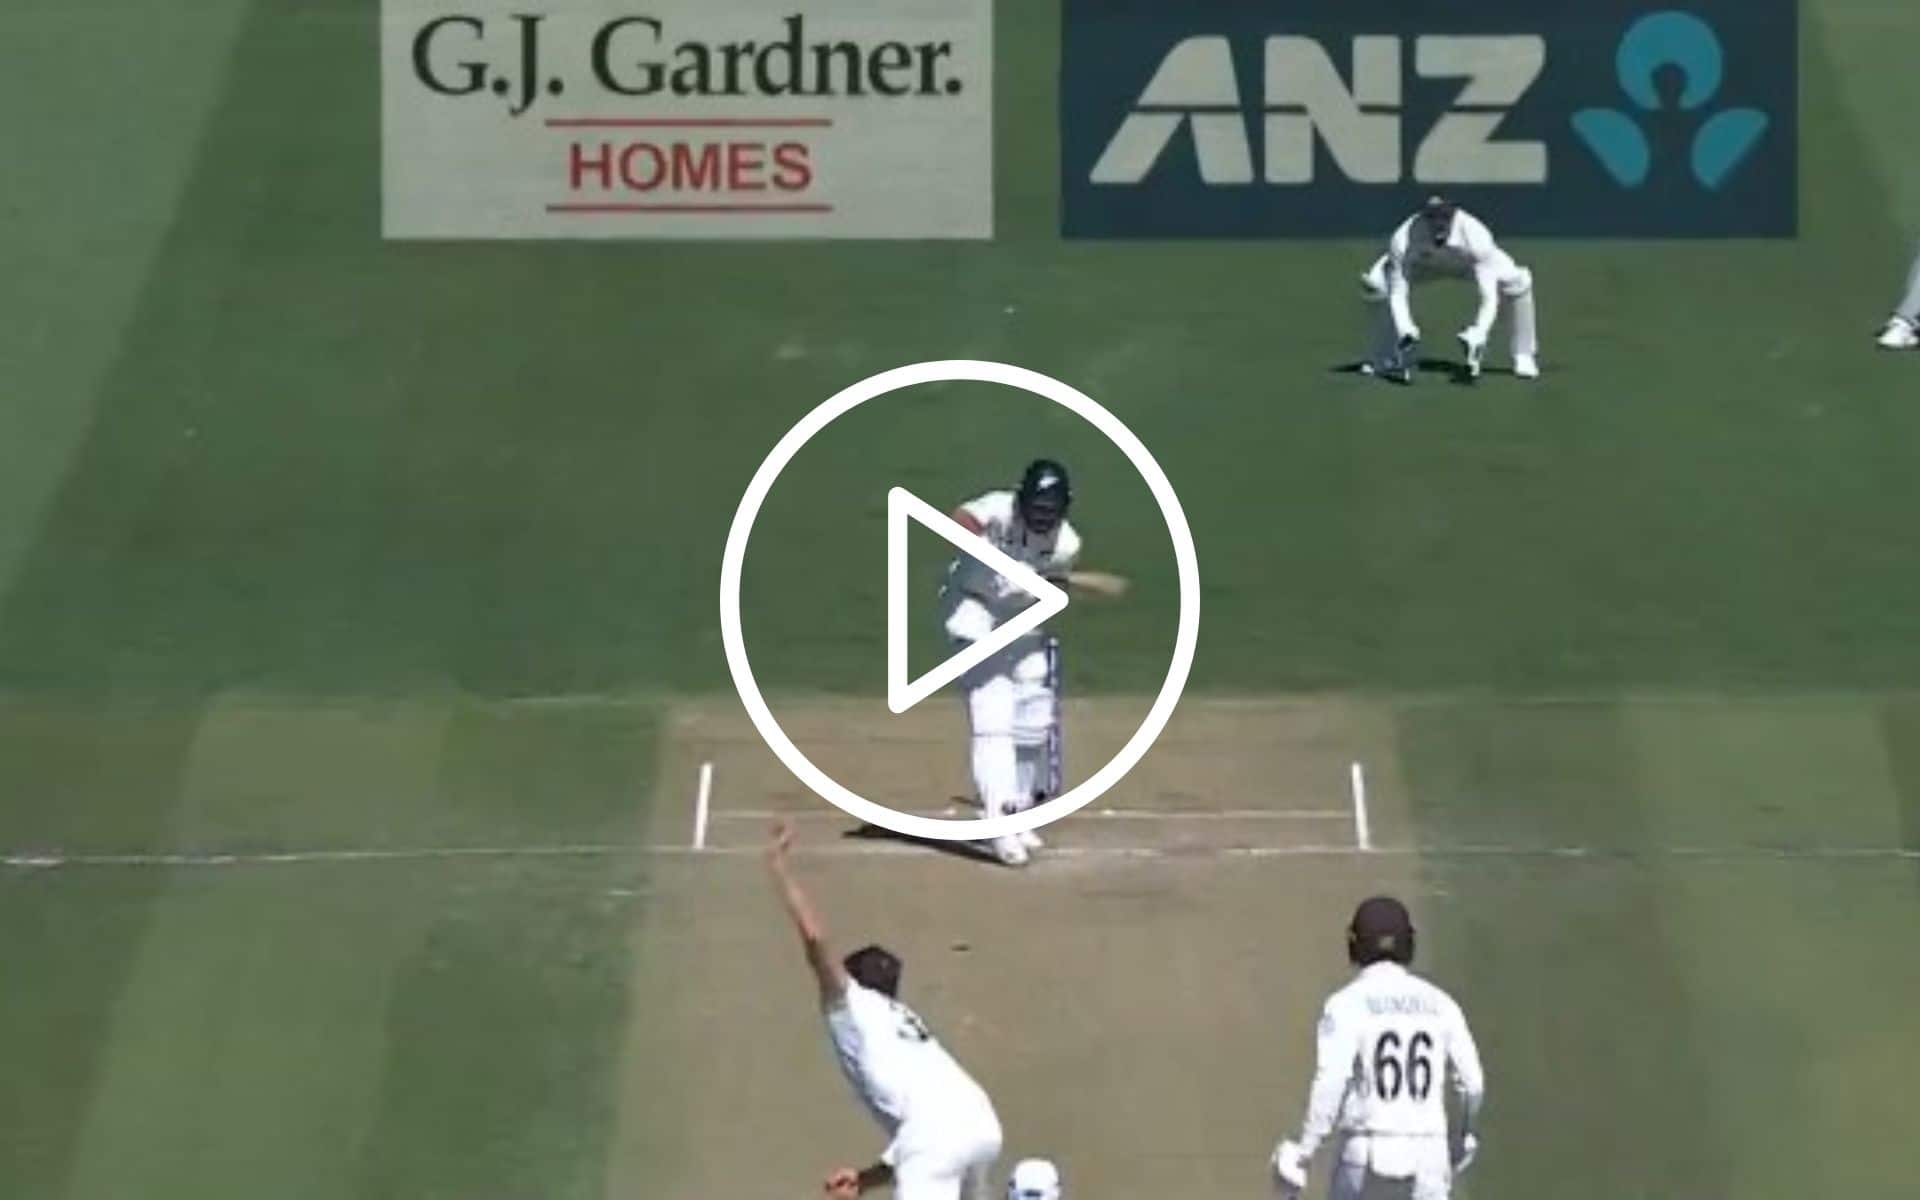 [Watch] Rachin Ravindra Gifts His Wicket to Pat Cummins After Well-Made 82